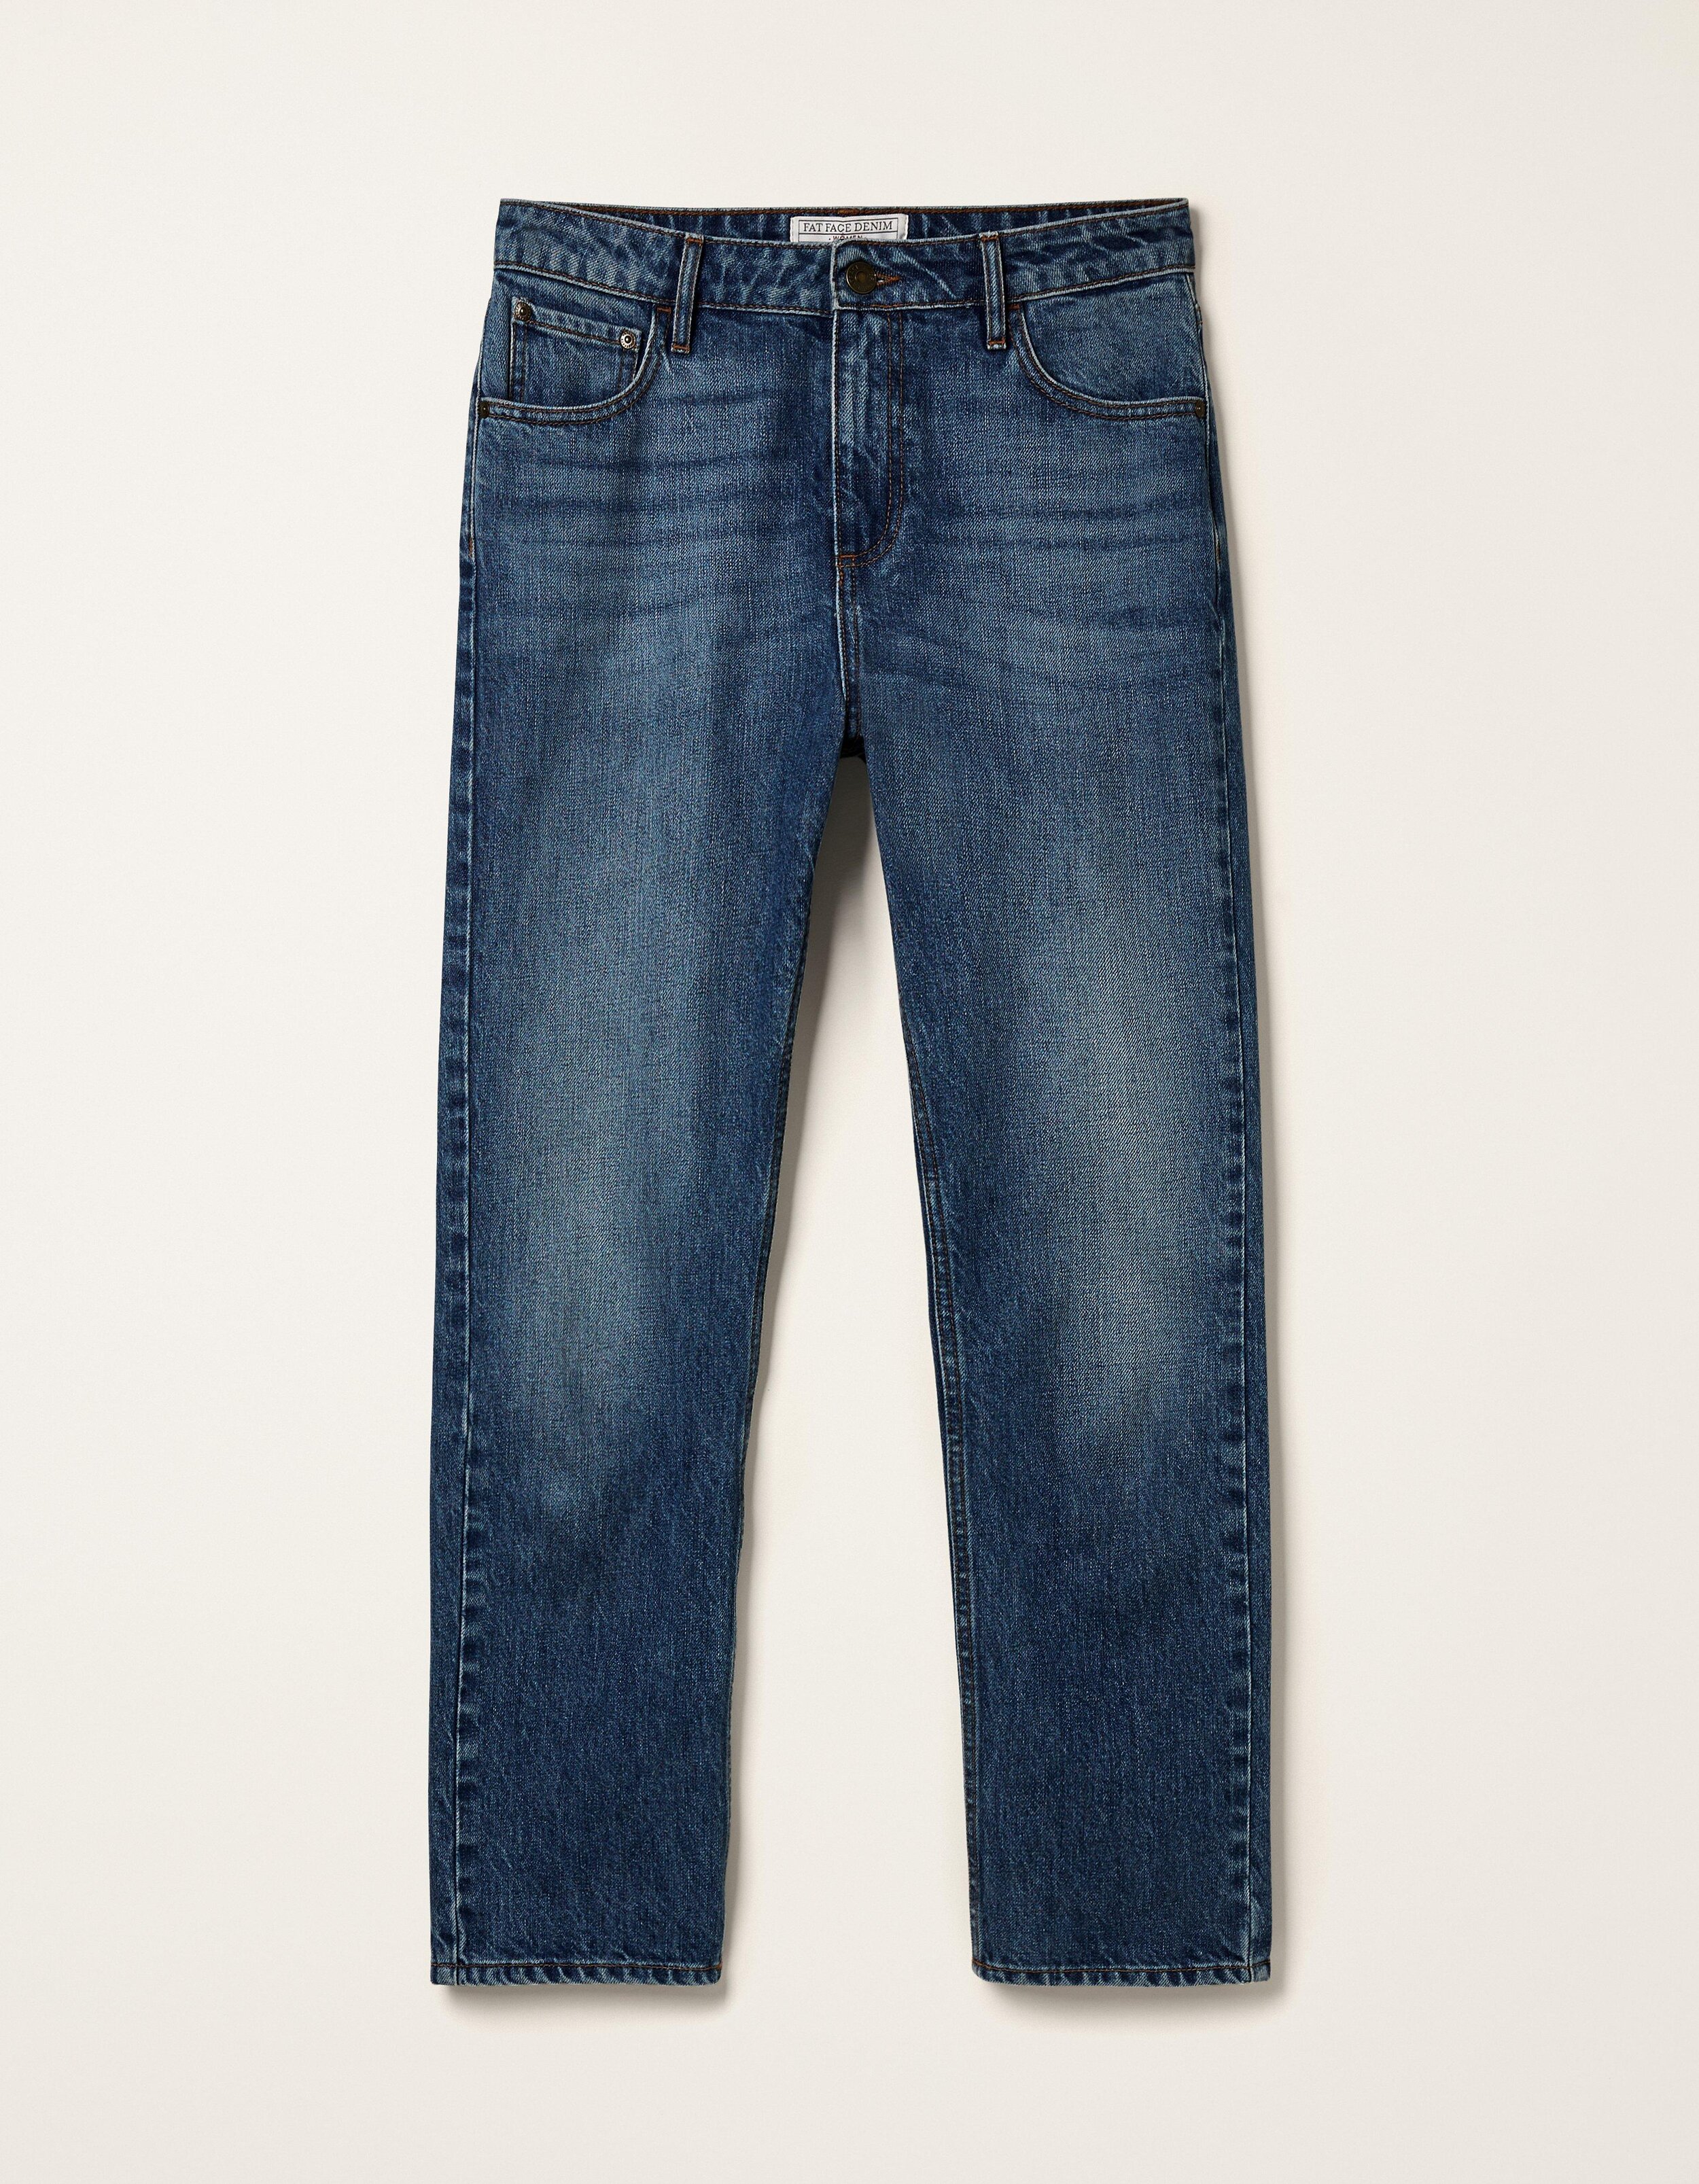 Fat Face Short Newham Straight Jeans £49.50